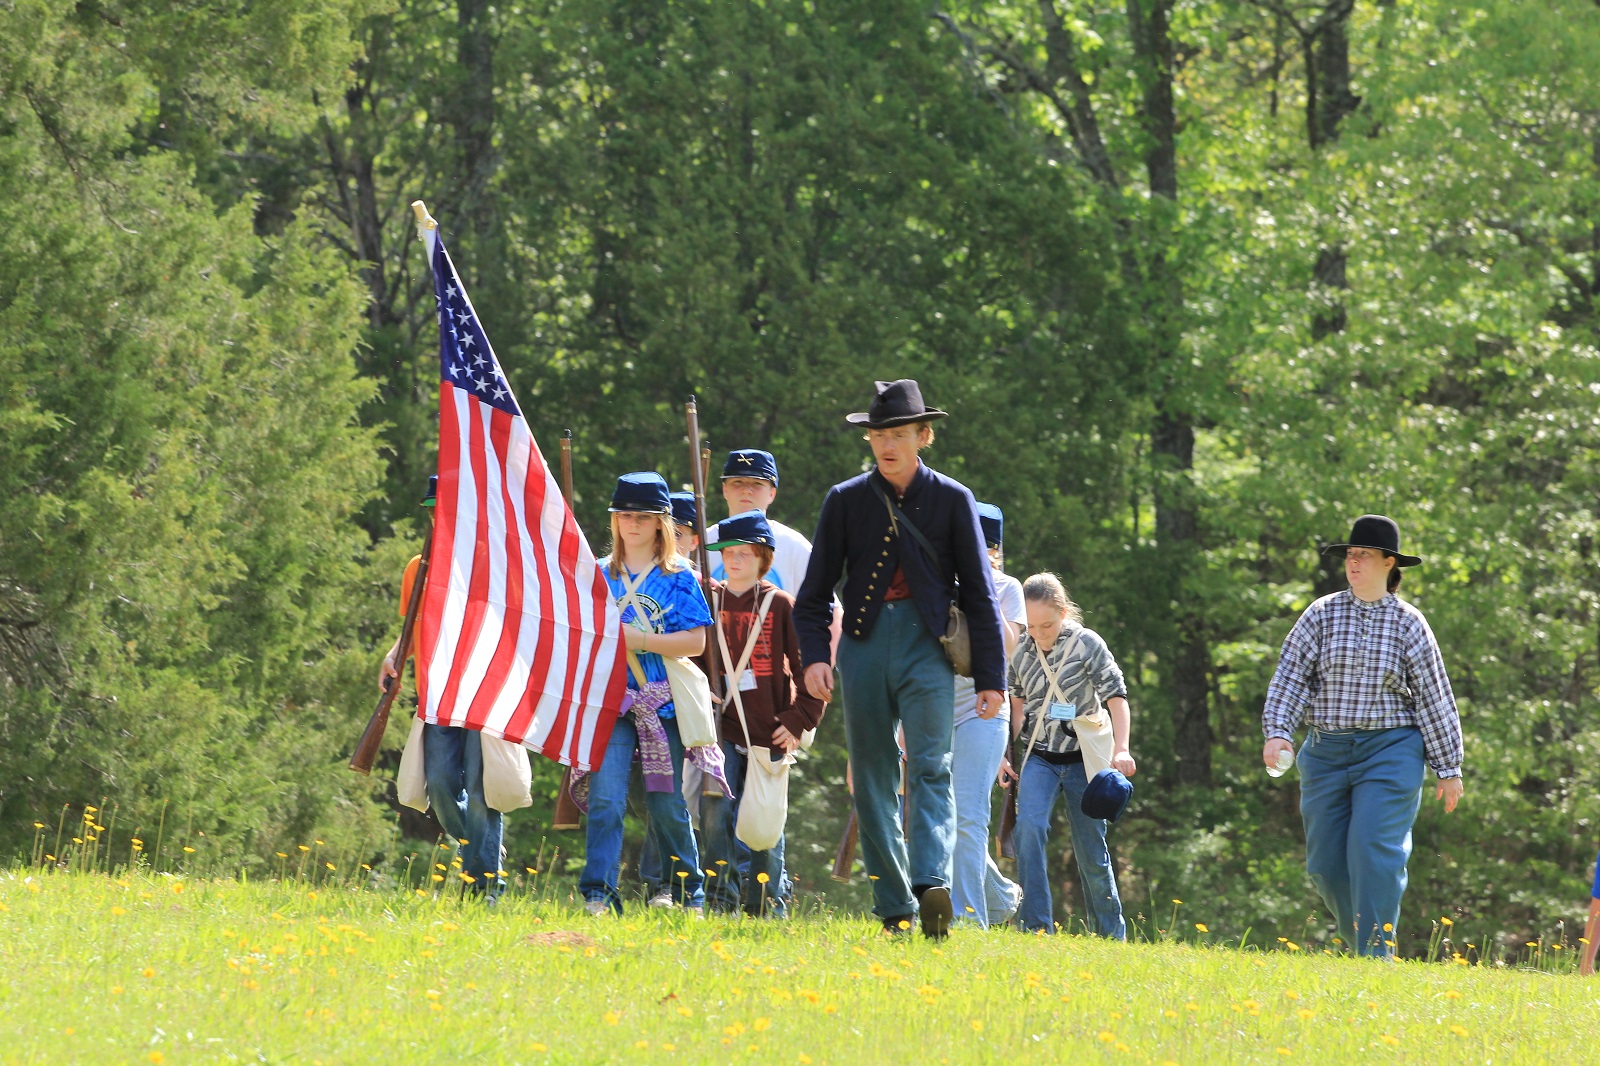 Kids march while carrying an American flag.